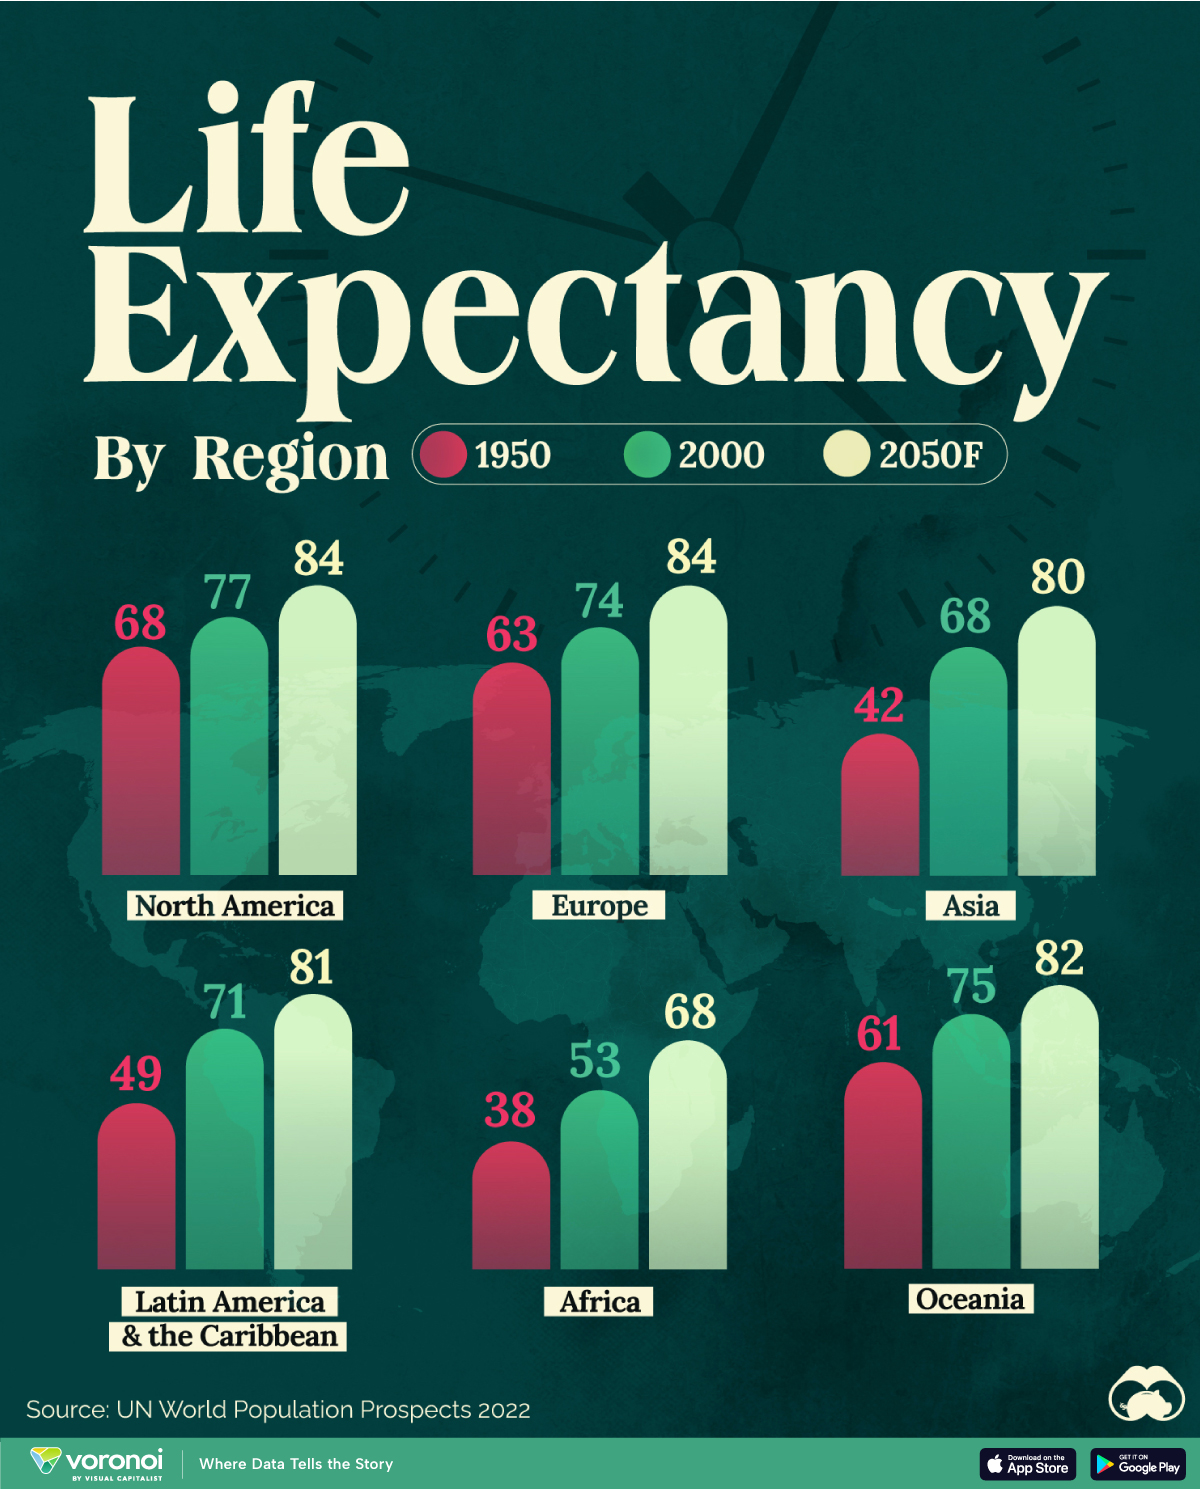 This chart illustrates the trajectory of life expectancy at birth for both sexes, comparing data from 1950, 2000, and 2050.